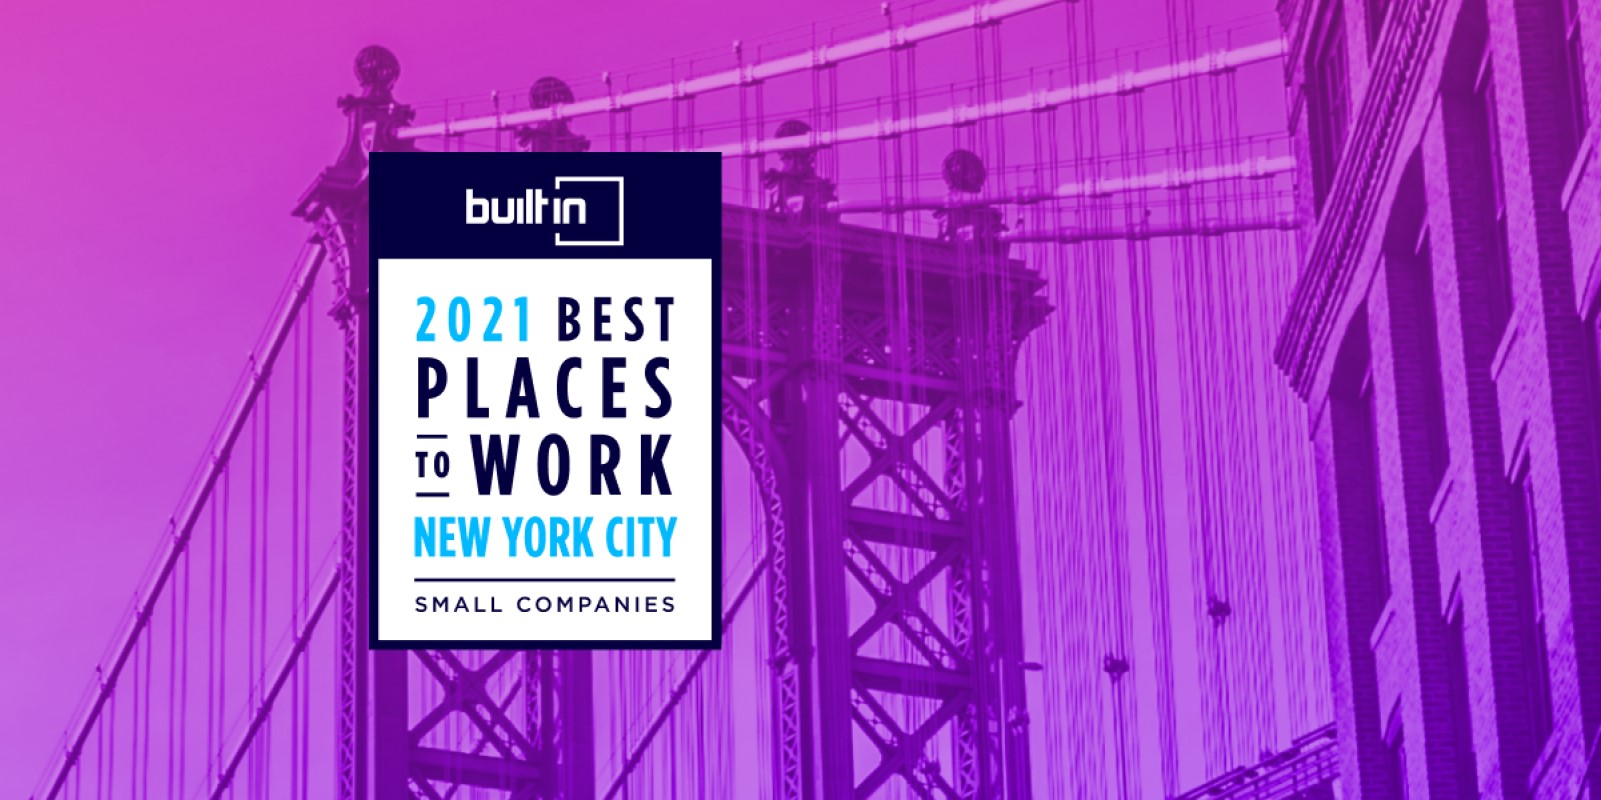 Stensul starts off the year on a high note: Named to “Best Places to Work” List by Built in NYC